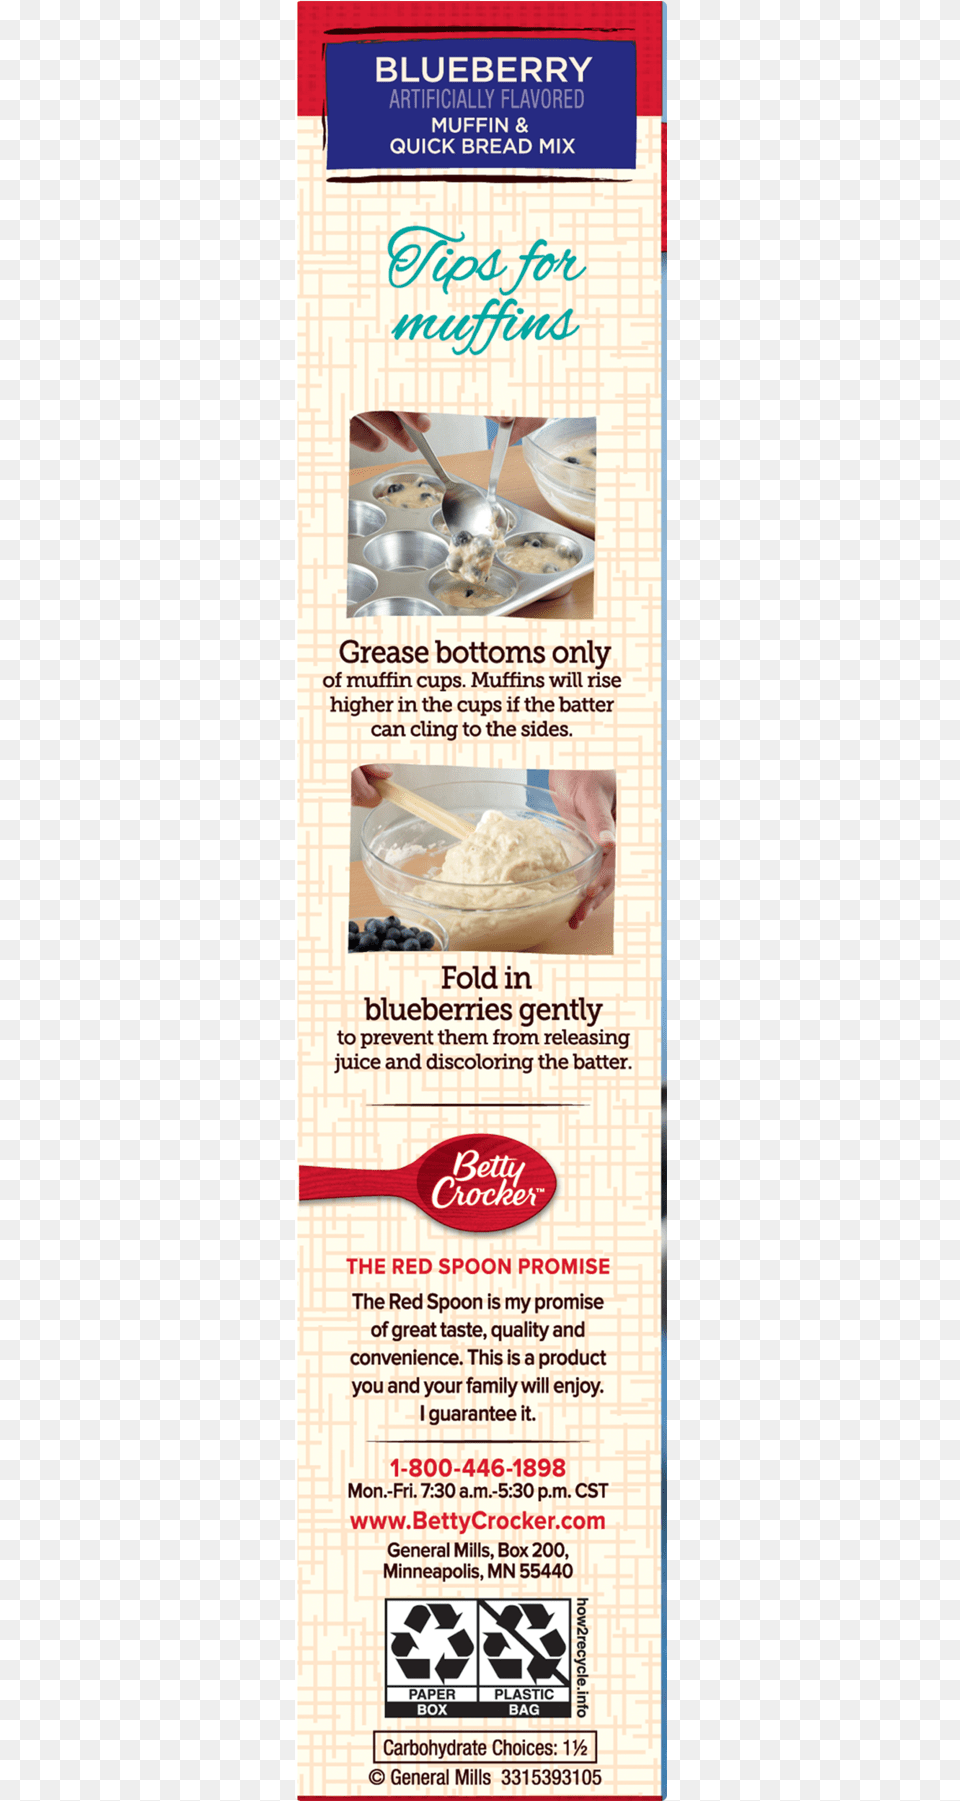 Betty Crocker Wild Blueberry Muffin And Quick Bread, Advertisement, Poster, Text, Qr Code Png Image